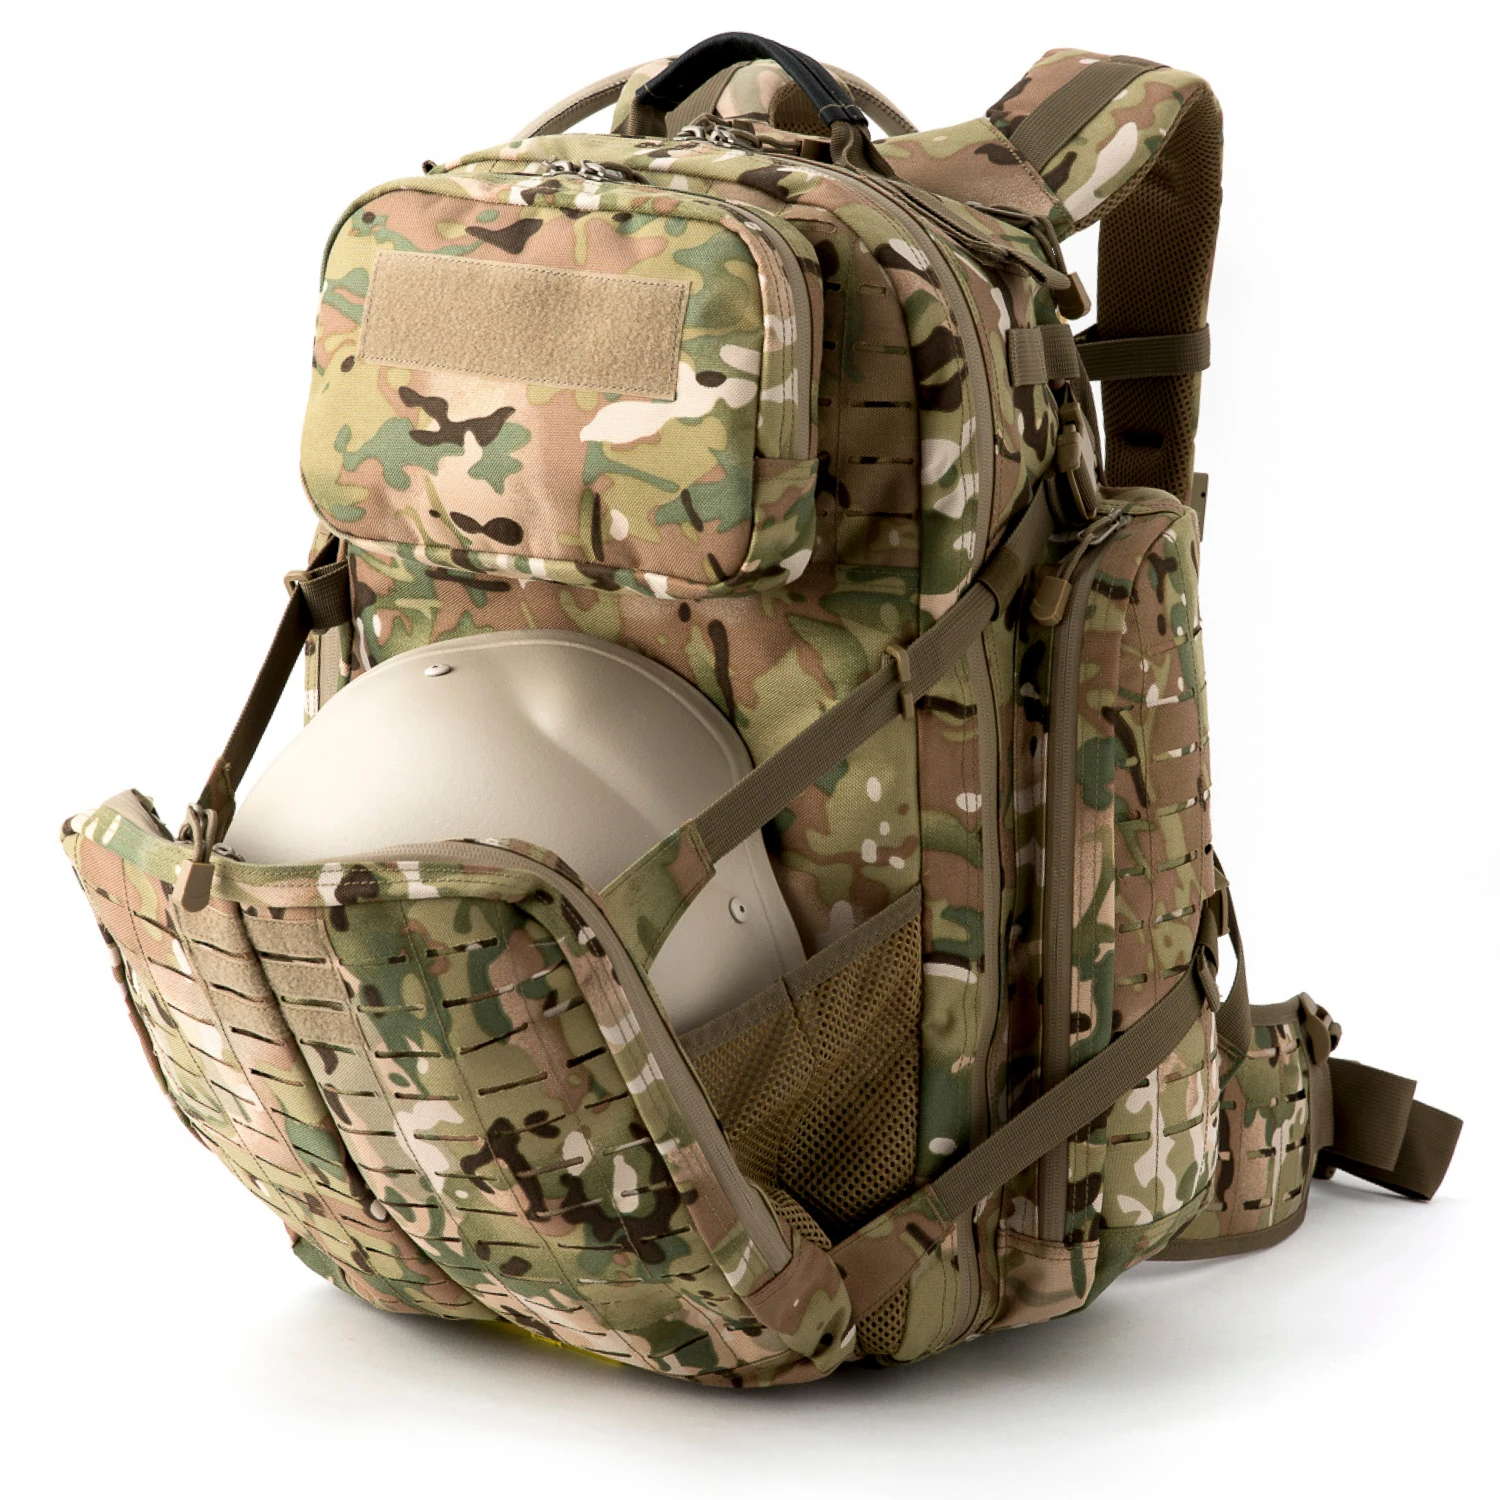 Details about   Army Rucksack Military Combat Daysack Multi Camo MTP Backpack Molle Small Bag 